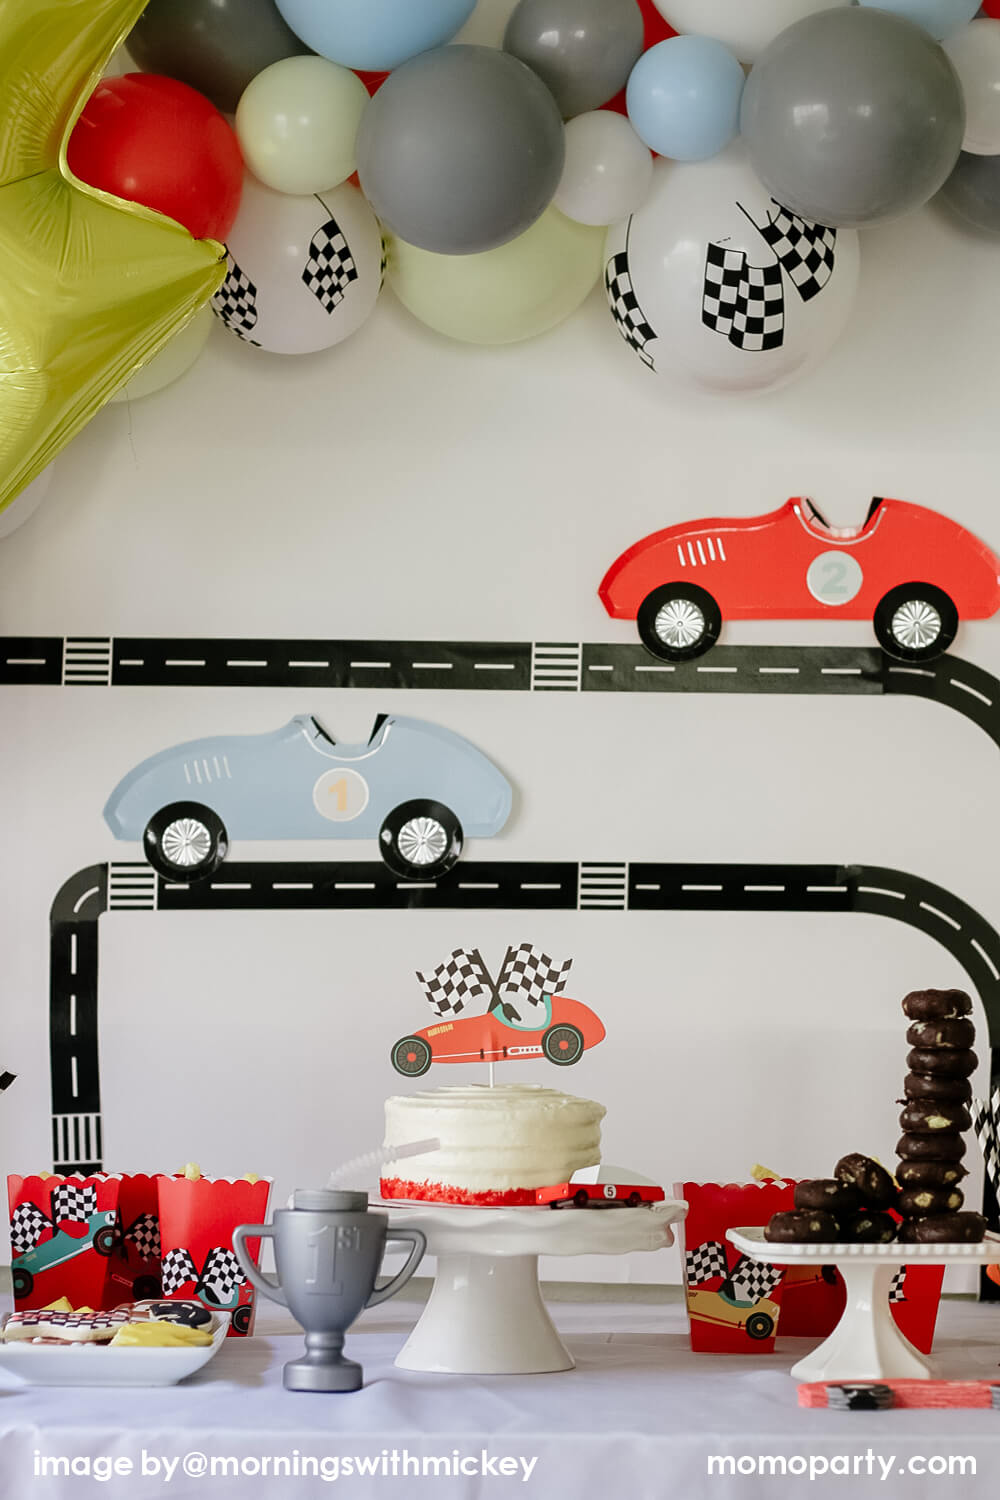 Modern disney race car party, decorated with Road Tape on the wall with Meri Meri Race Car Die-cut Paper Plates, modern pastel themed balloon cloud mix with flag latex balloon and lighting bolt foil balloon, race car topper on a buttercream cake, trophy sipper, mini donuts as tire on a cake stand, red popcorn cups with race car stickers next to the main cake. A modern Car themed Birthday Party at home by Mornings-with-Mickey